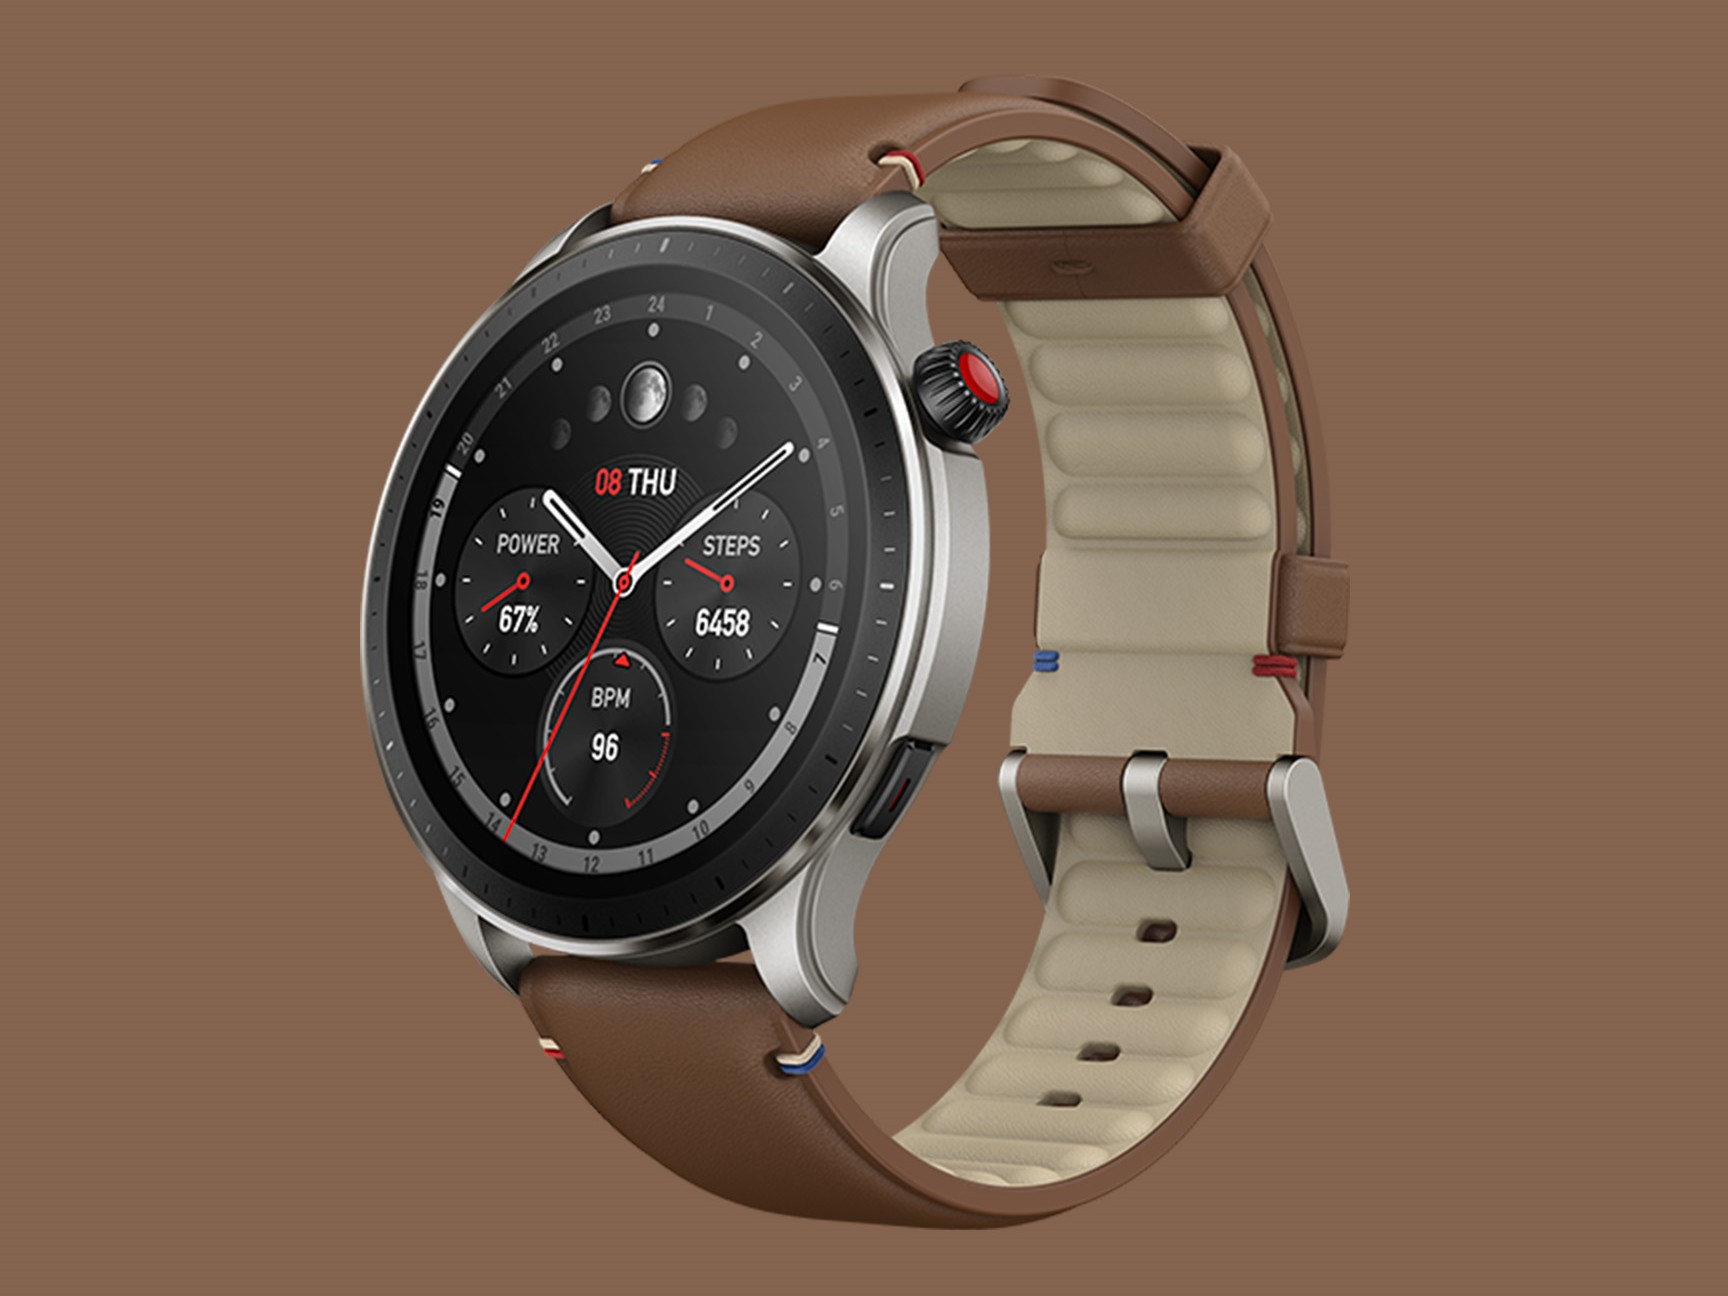 Amazfit GTR 4 smartwatch receives update 3.17.0.2 with new Route